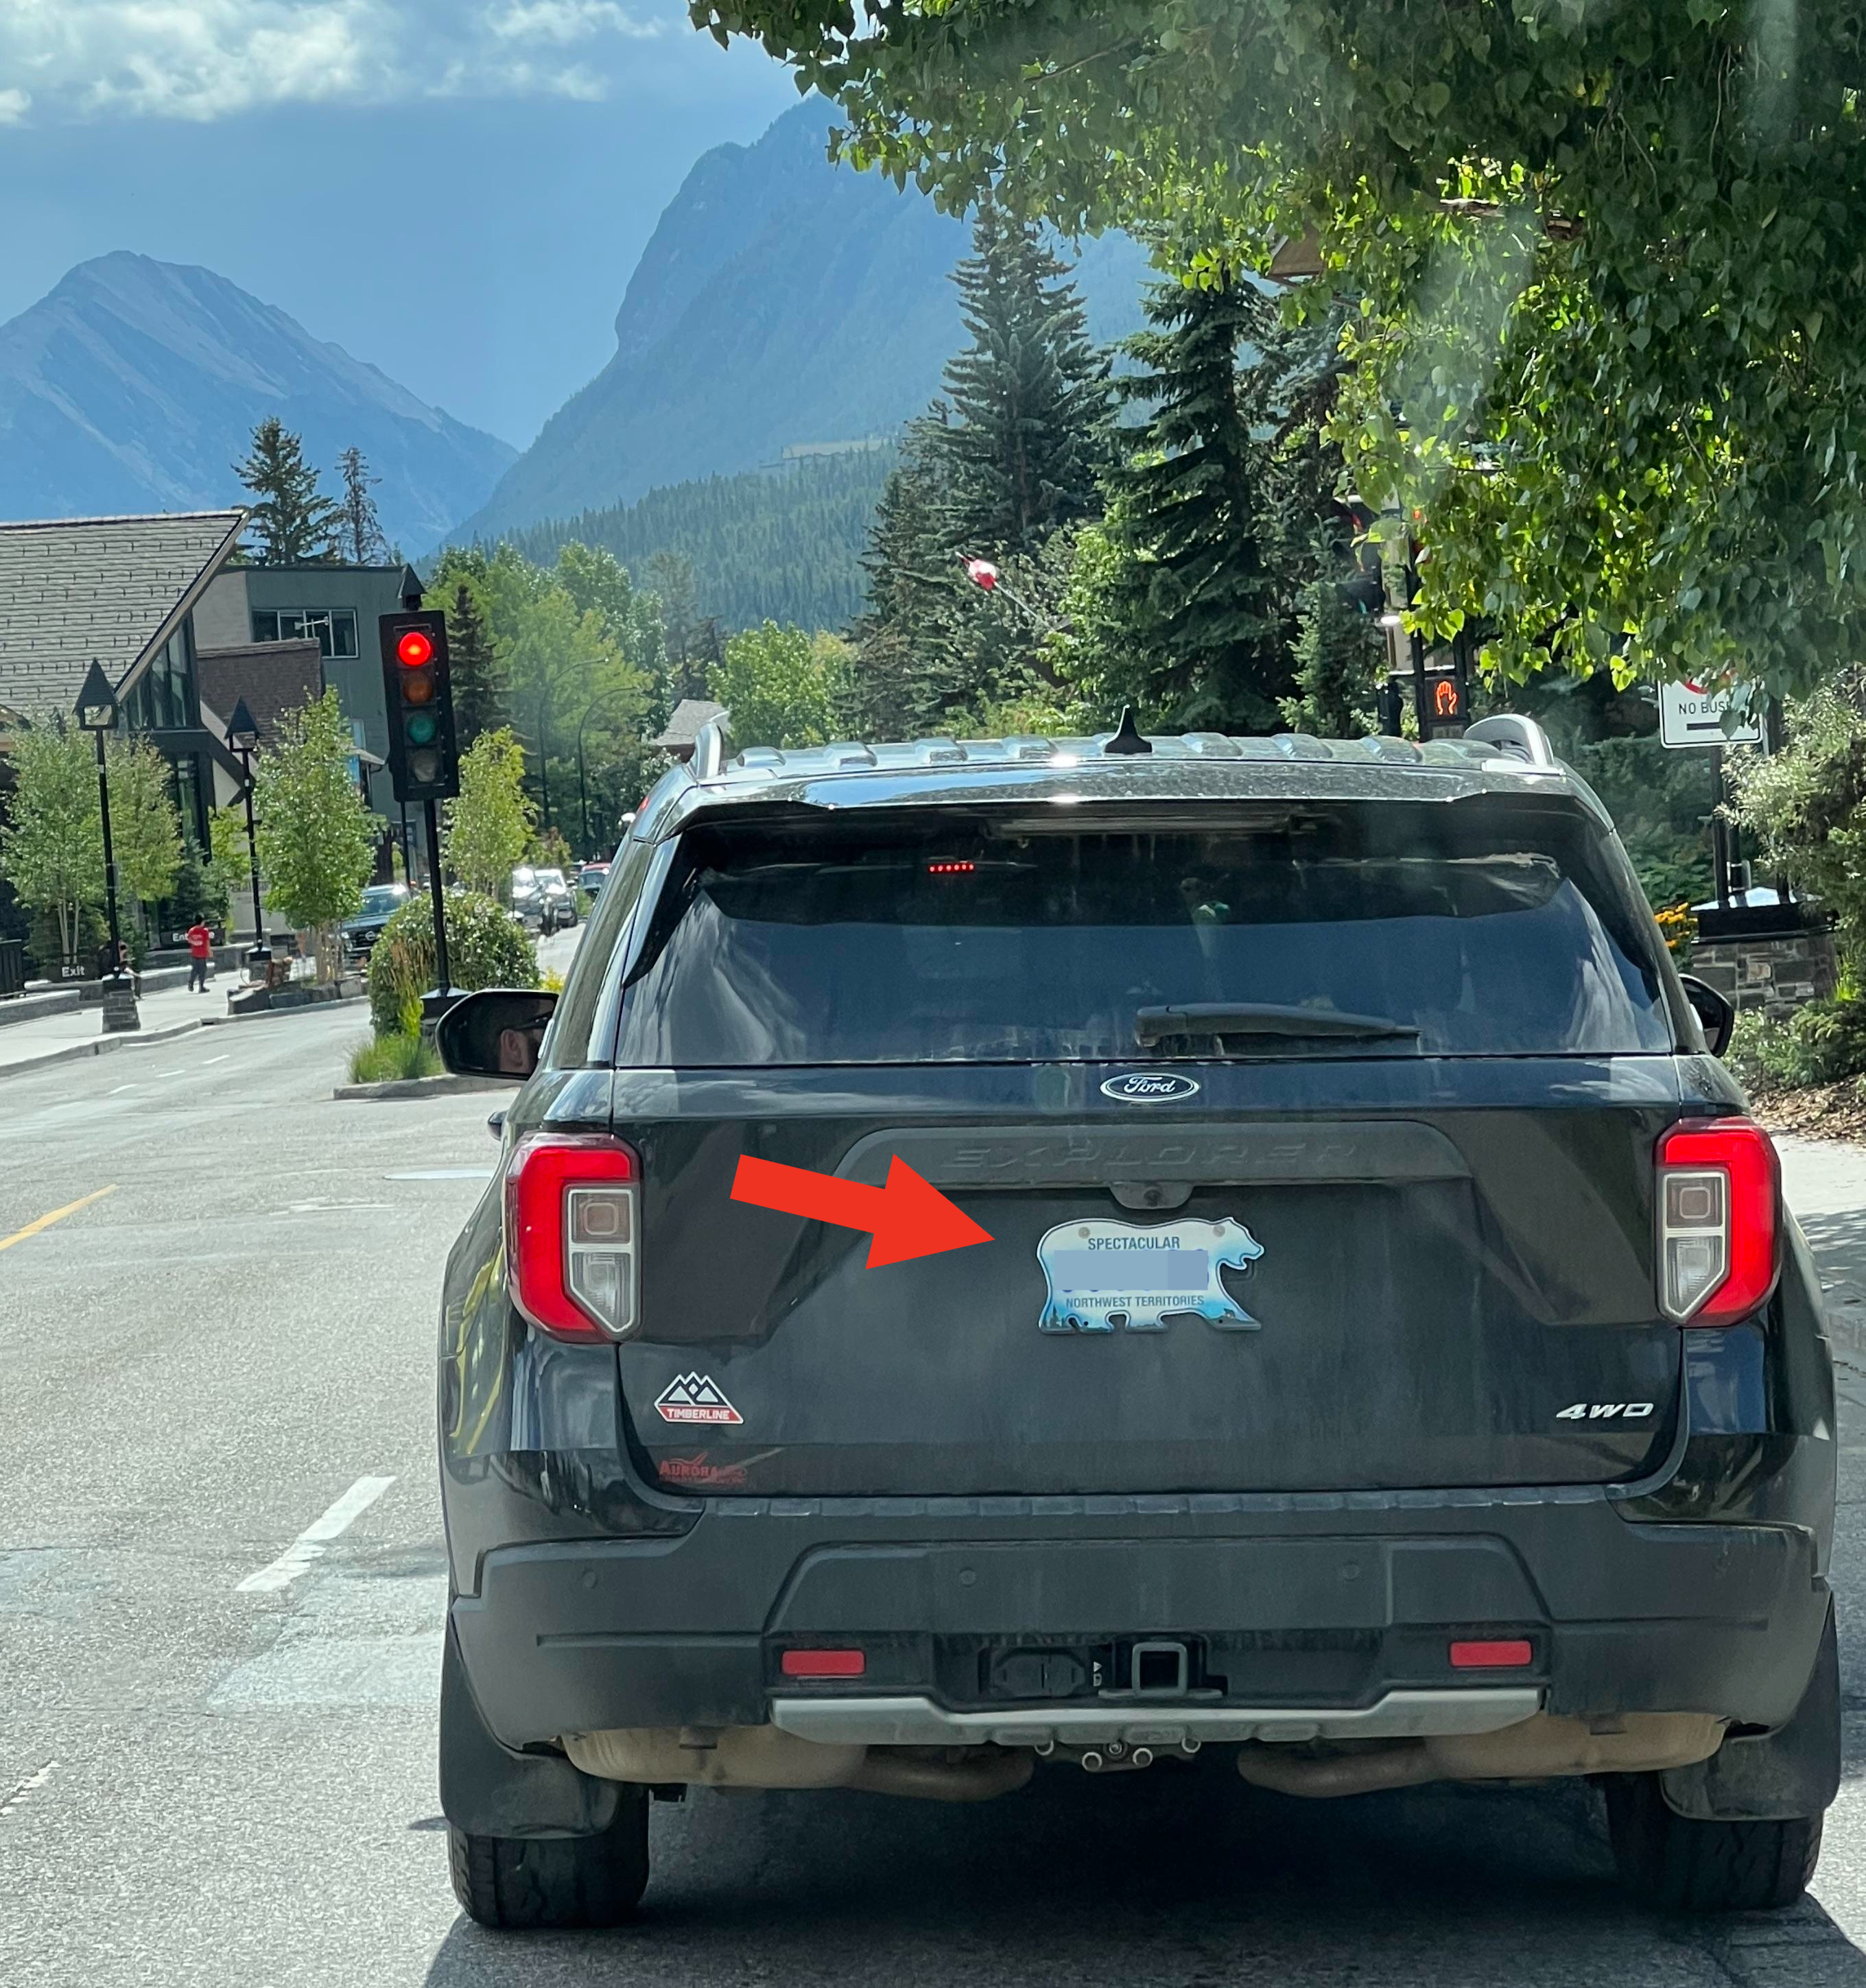 Arrow pointing to a car&#x27;s license plate in the shape of a bear